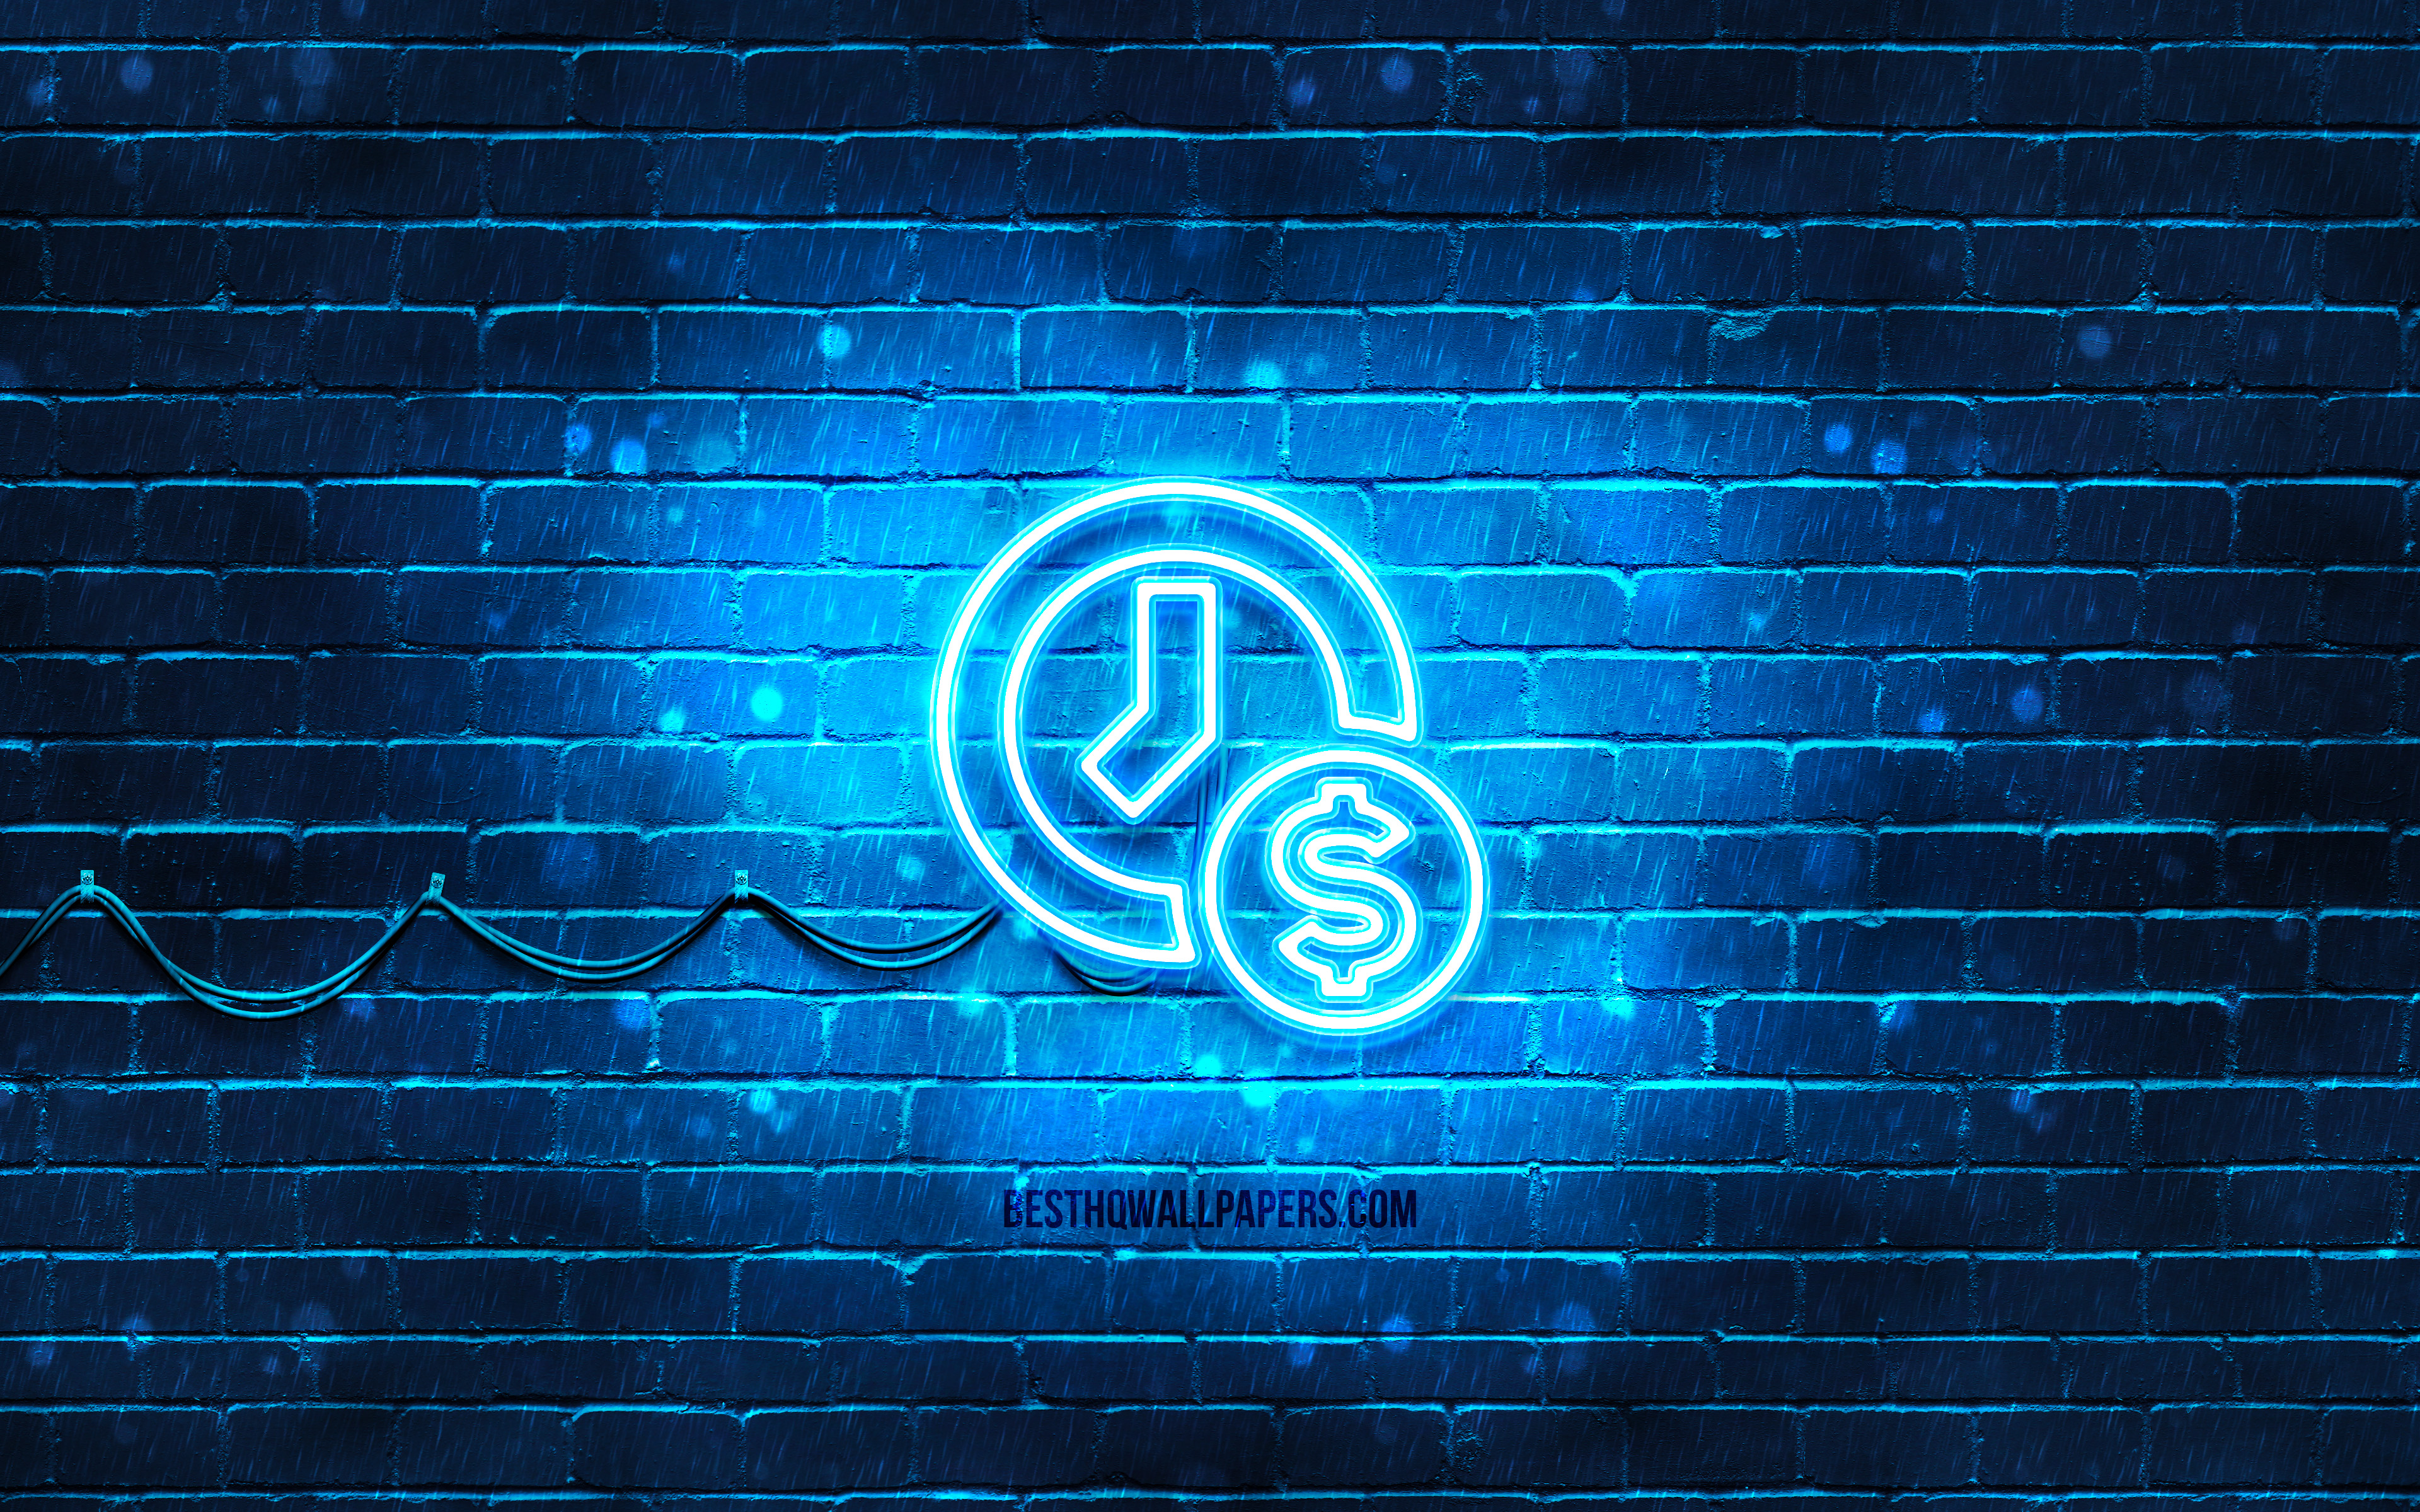 Download wallpaper Time is money neon icon, 4k, blue background, neon symbols, Time is money, neon icons, Time is money sign, financial signs, Time is money icon, financial icons for desktop with